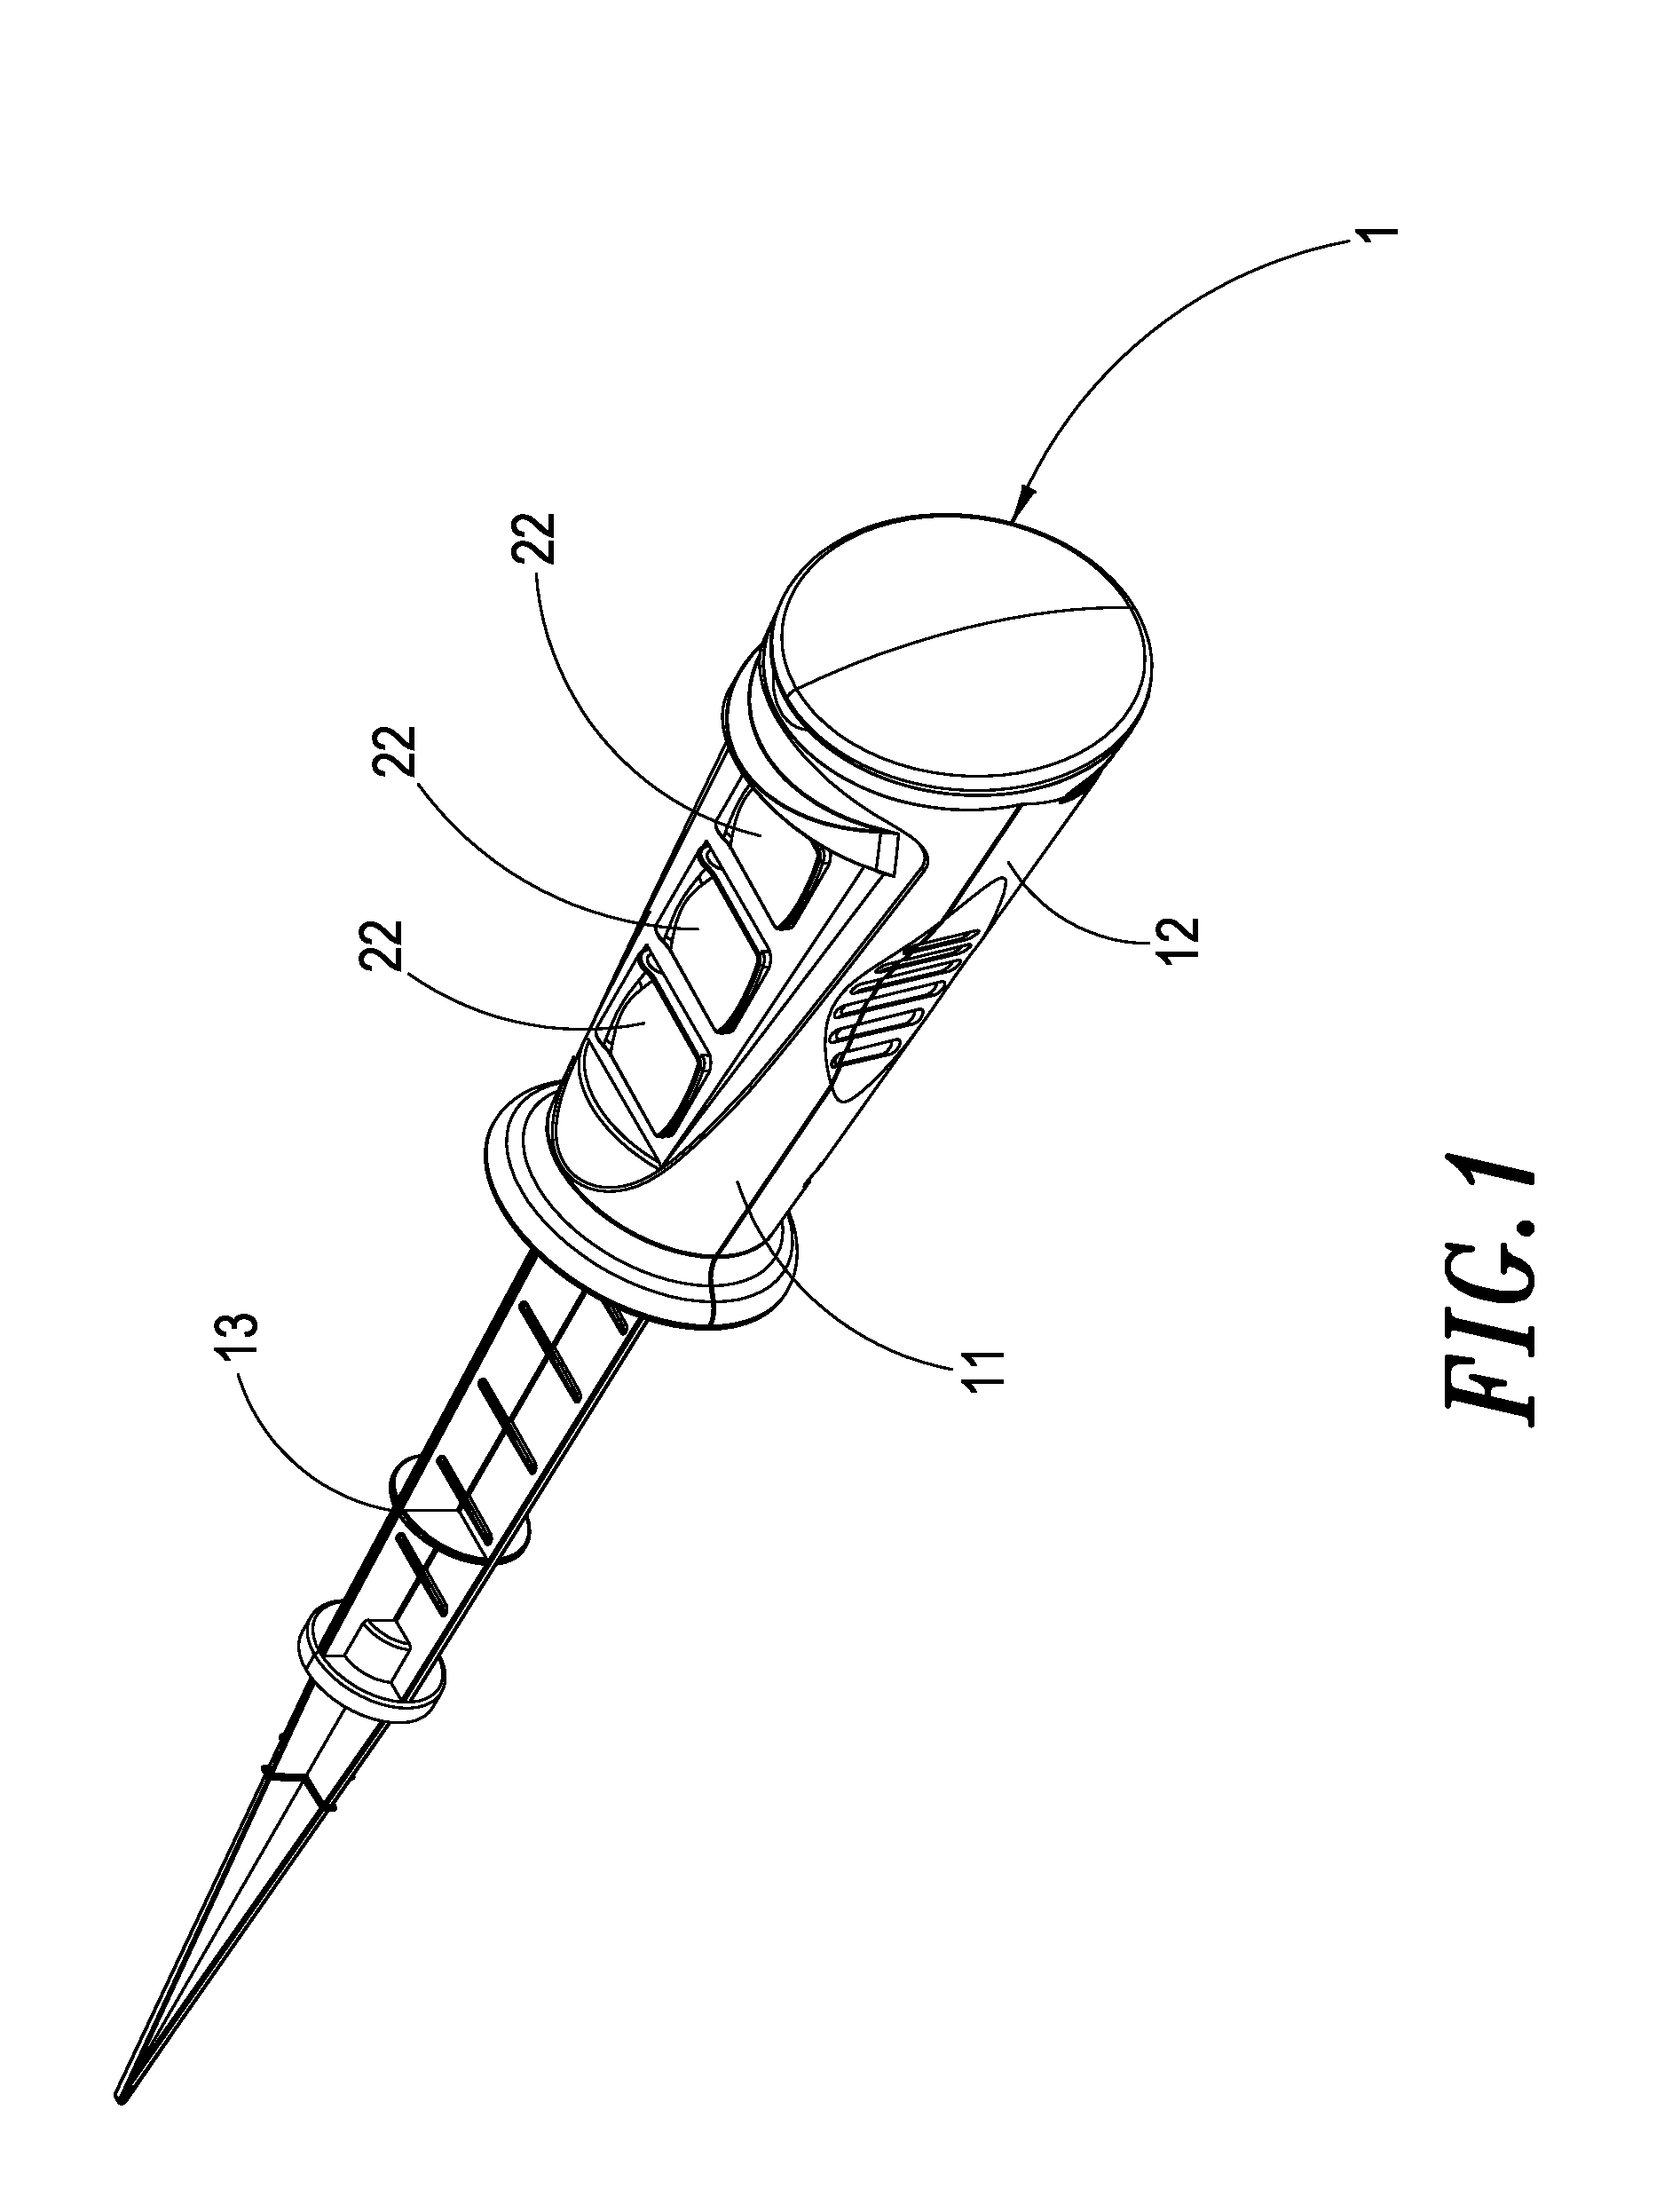 Outdoor power socket having a recessed part to accommodate a connection element for attaching a protective lid